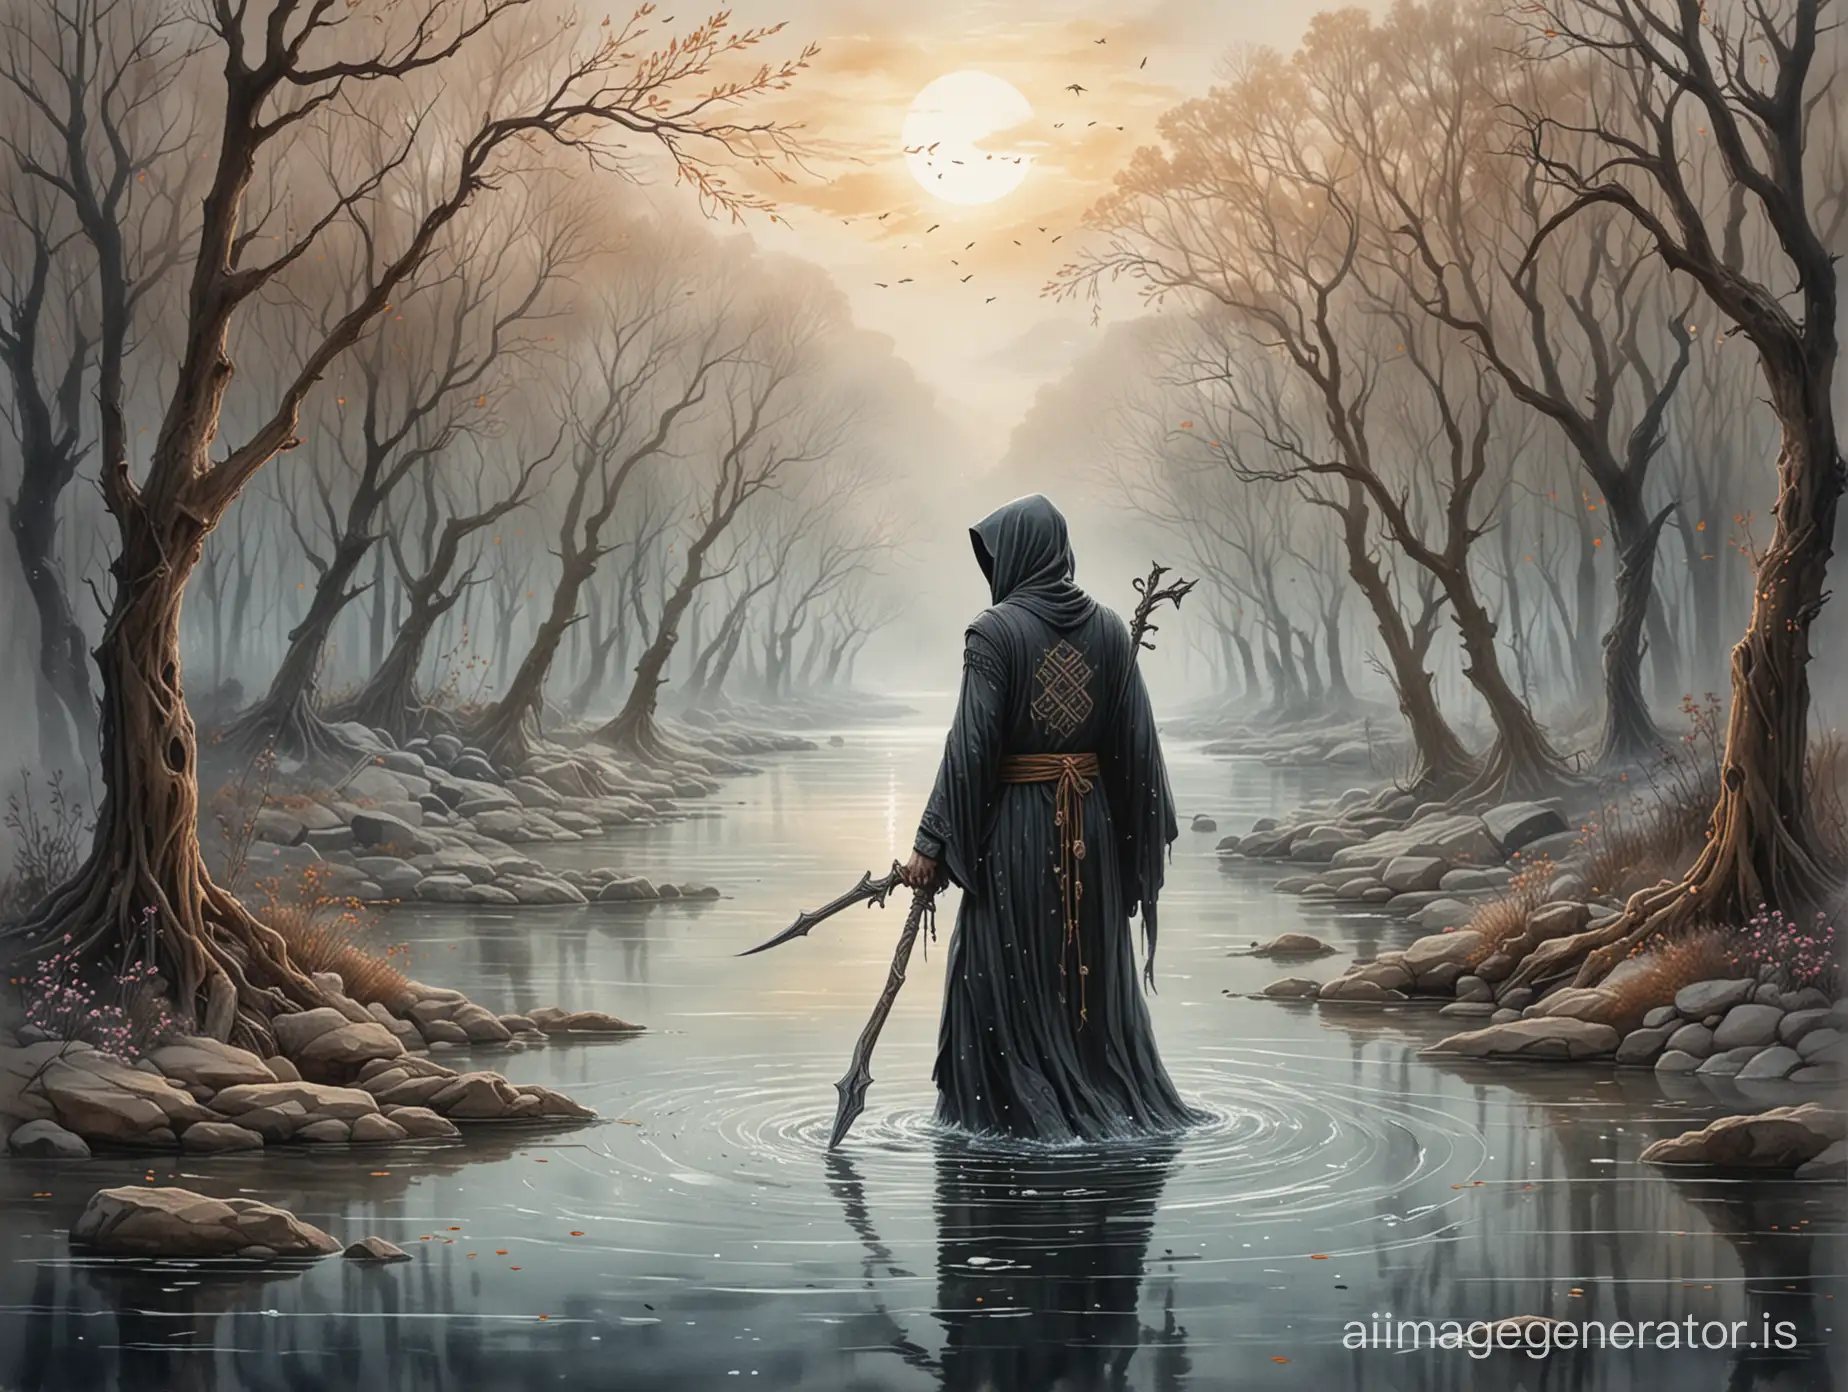 A soul reaper, with intricate tattoos of ancient runes covering their arms, floating above a mystical river of souls, guiding departed spirits towards the light with a compassionate yet solemn demeanor, a mix of mysticism and melancholy in their presence, Painting, using watercolors to create a dreamlike and ethereal atmosphere around the soul reaper,